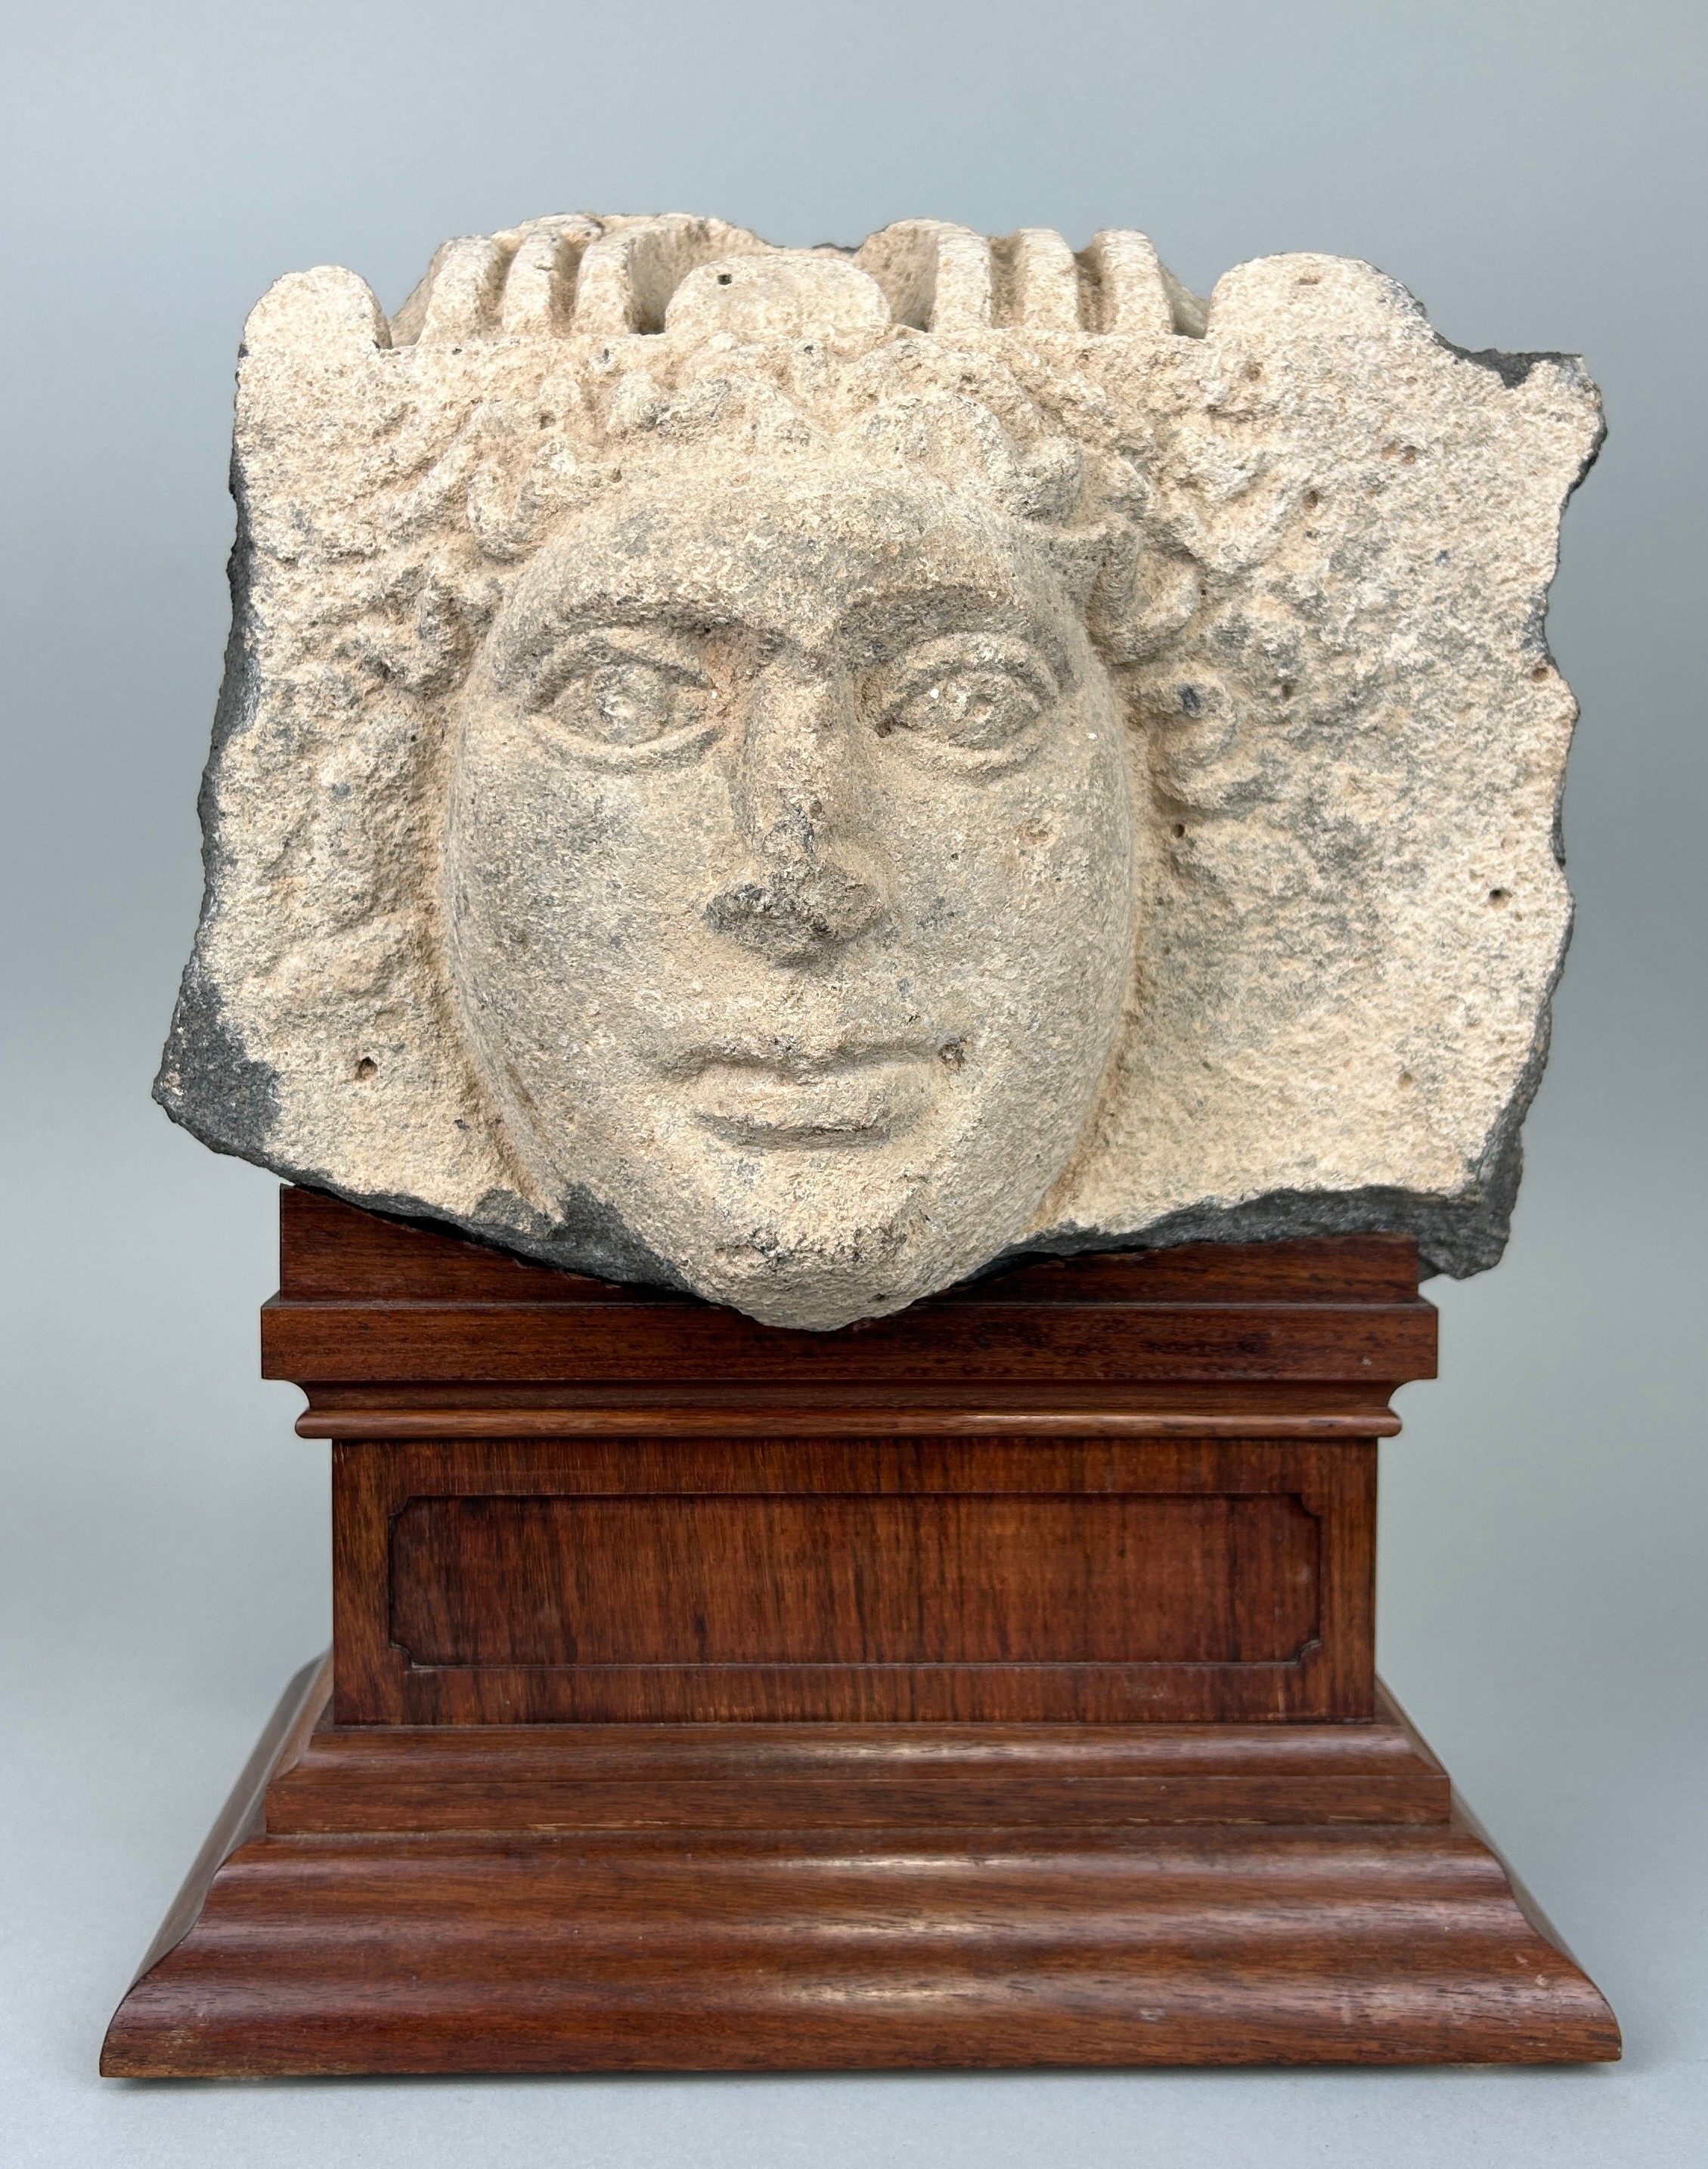 AN EAST ROMAN 'HAURAN' BASALT RELIEF FRAGMENT IN THE FORM OF A HUMAN HEAD CIRCA 2ND CENTURY A.D. The - Image 2 of 9